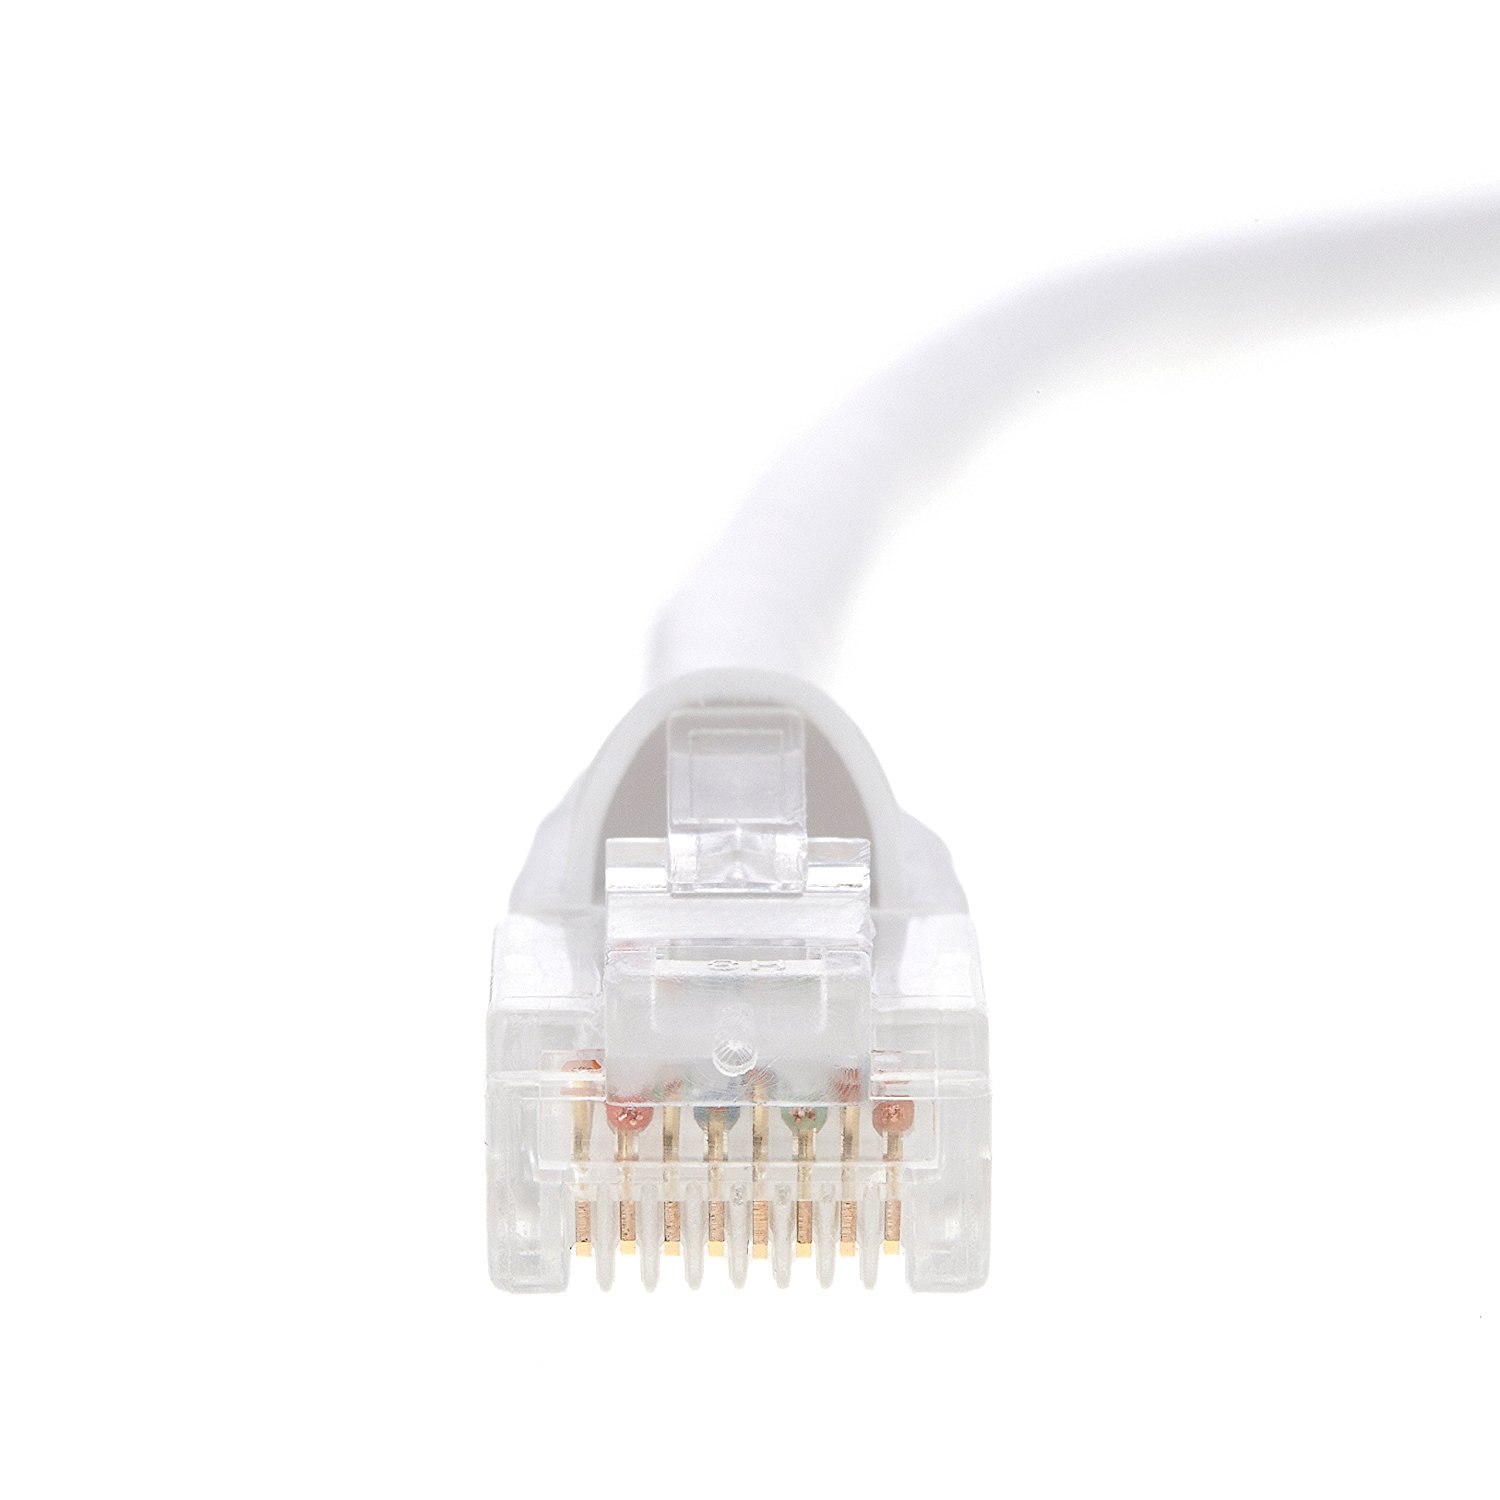 InstallerParts (5 Pack) Ethernet Cable CAT6 Cable UTP Booted 100 FT - White - Professional Series - 10Gigabit/Sec Network / High Speed Internet Cable, 550MHZ - image 5 of 5